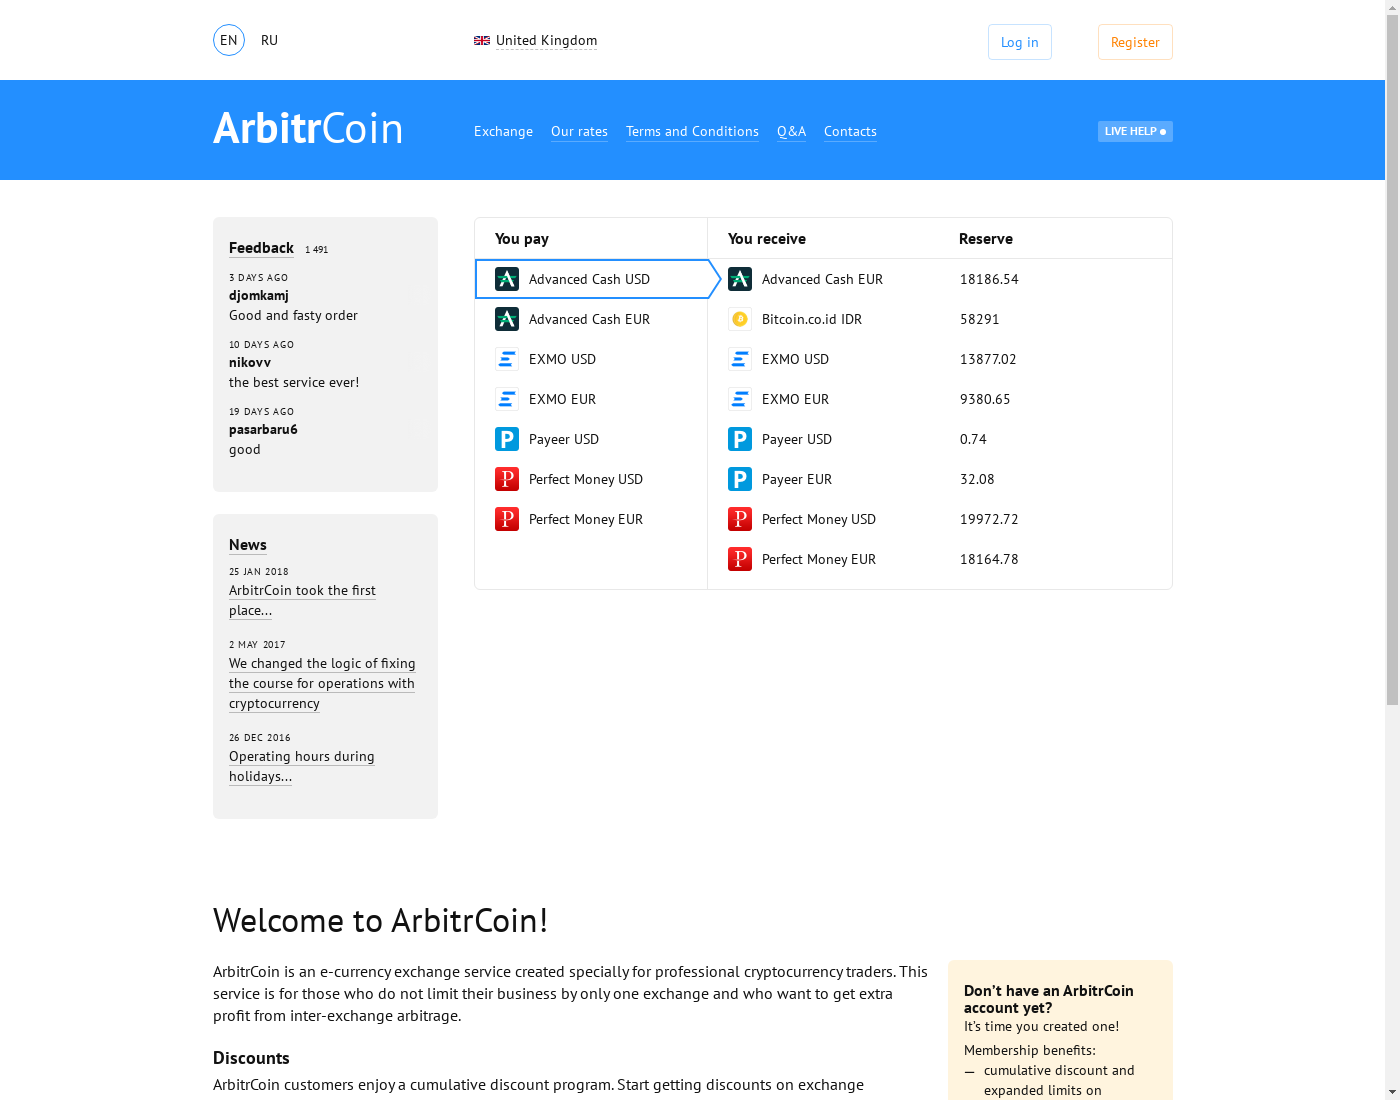 ArbitrCoin user interface: the home page in English